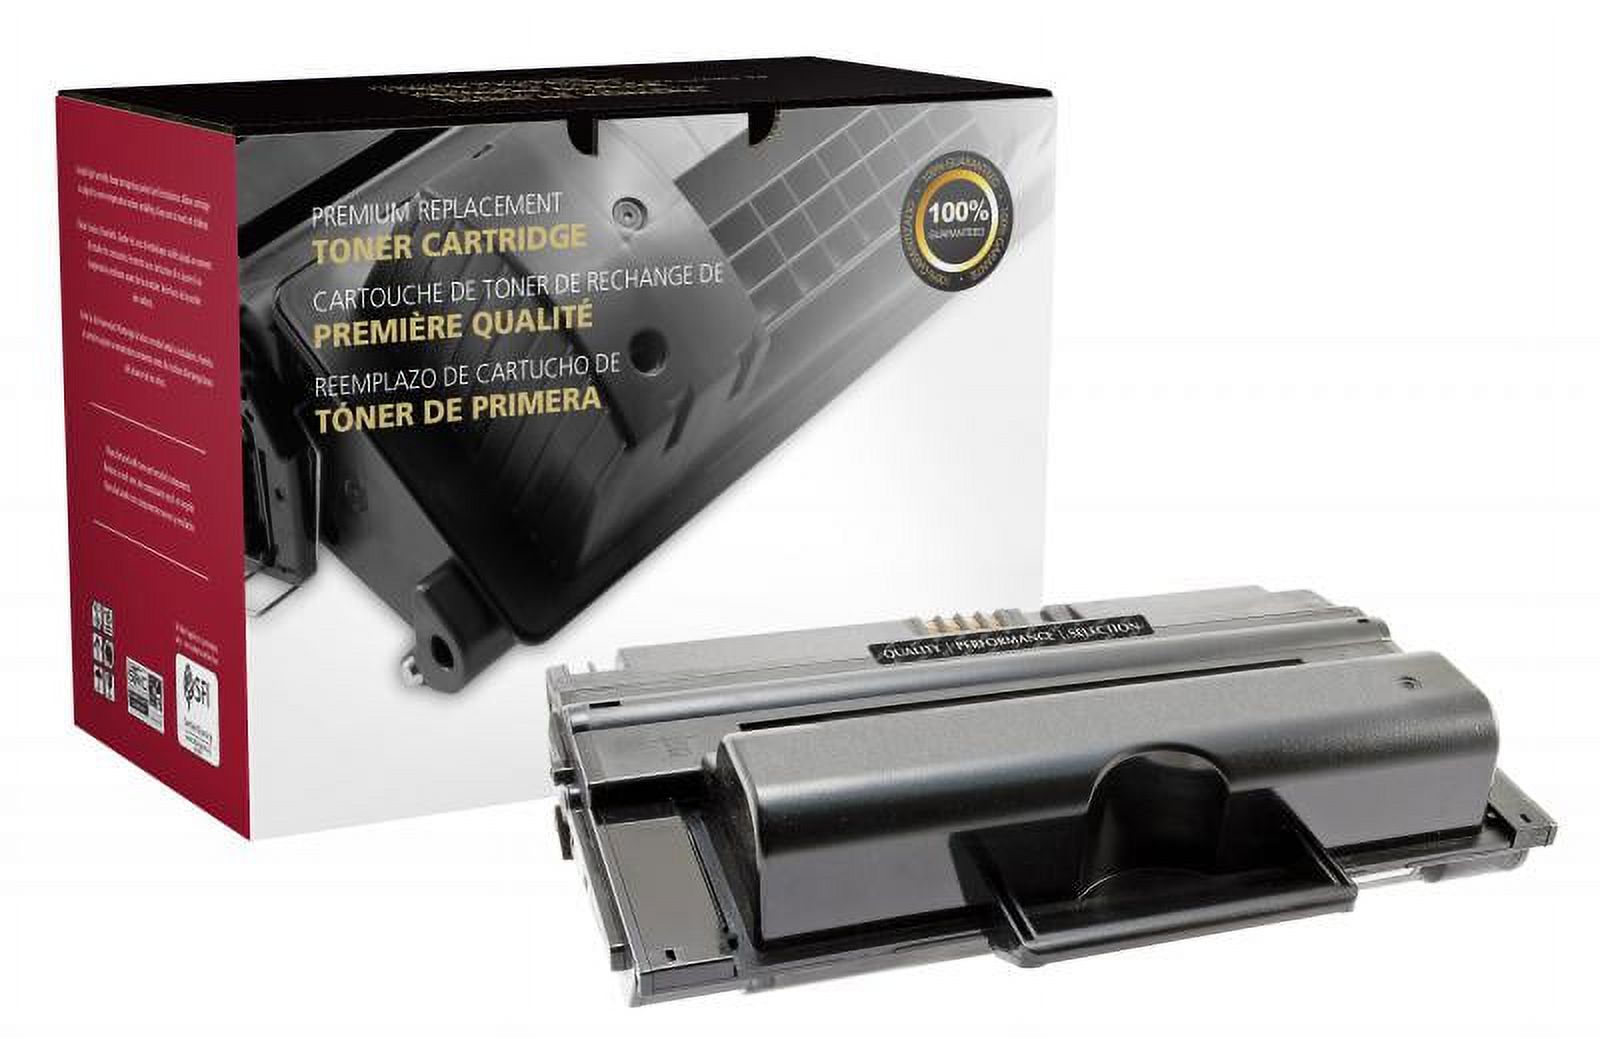 Clover Imaging Remanufactured High Yield Toner Cartridge for Samsung ML-D3470B/ML-D3470A - image 1 of 2